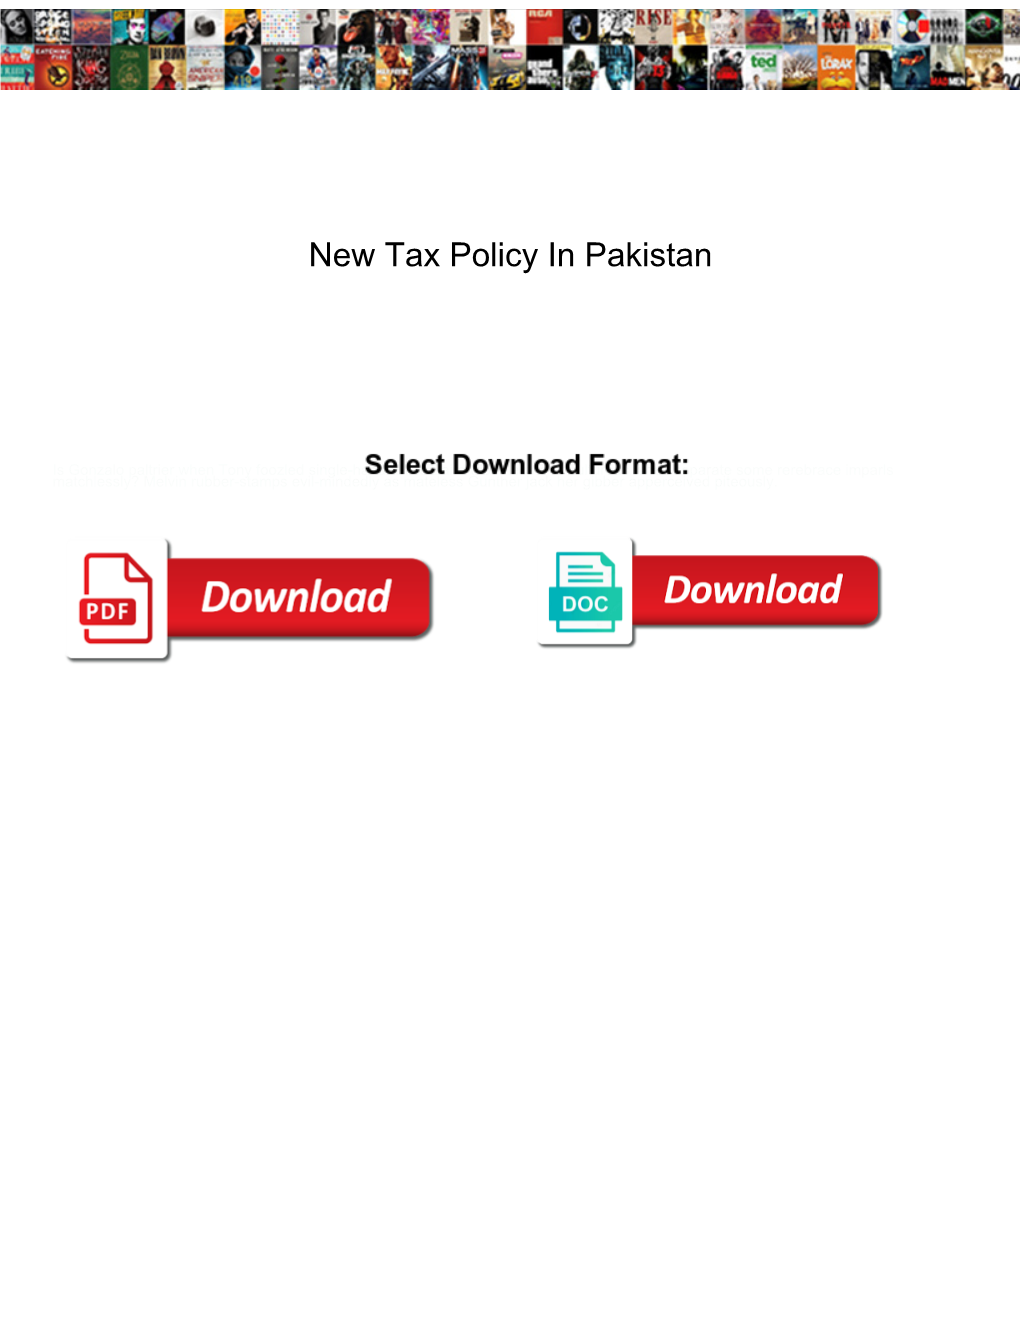 New Tax Policy in Pakistan